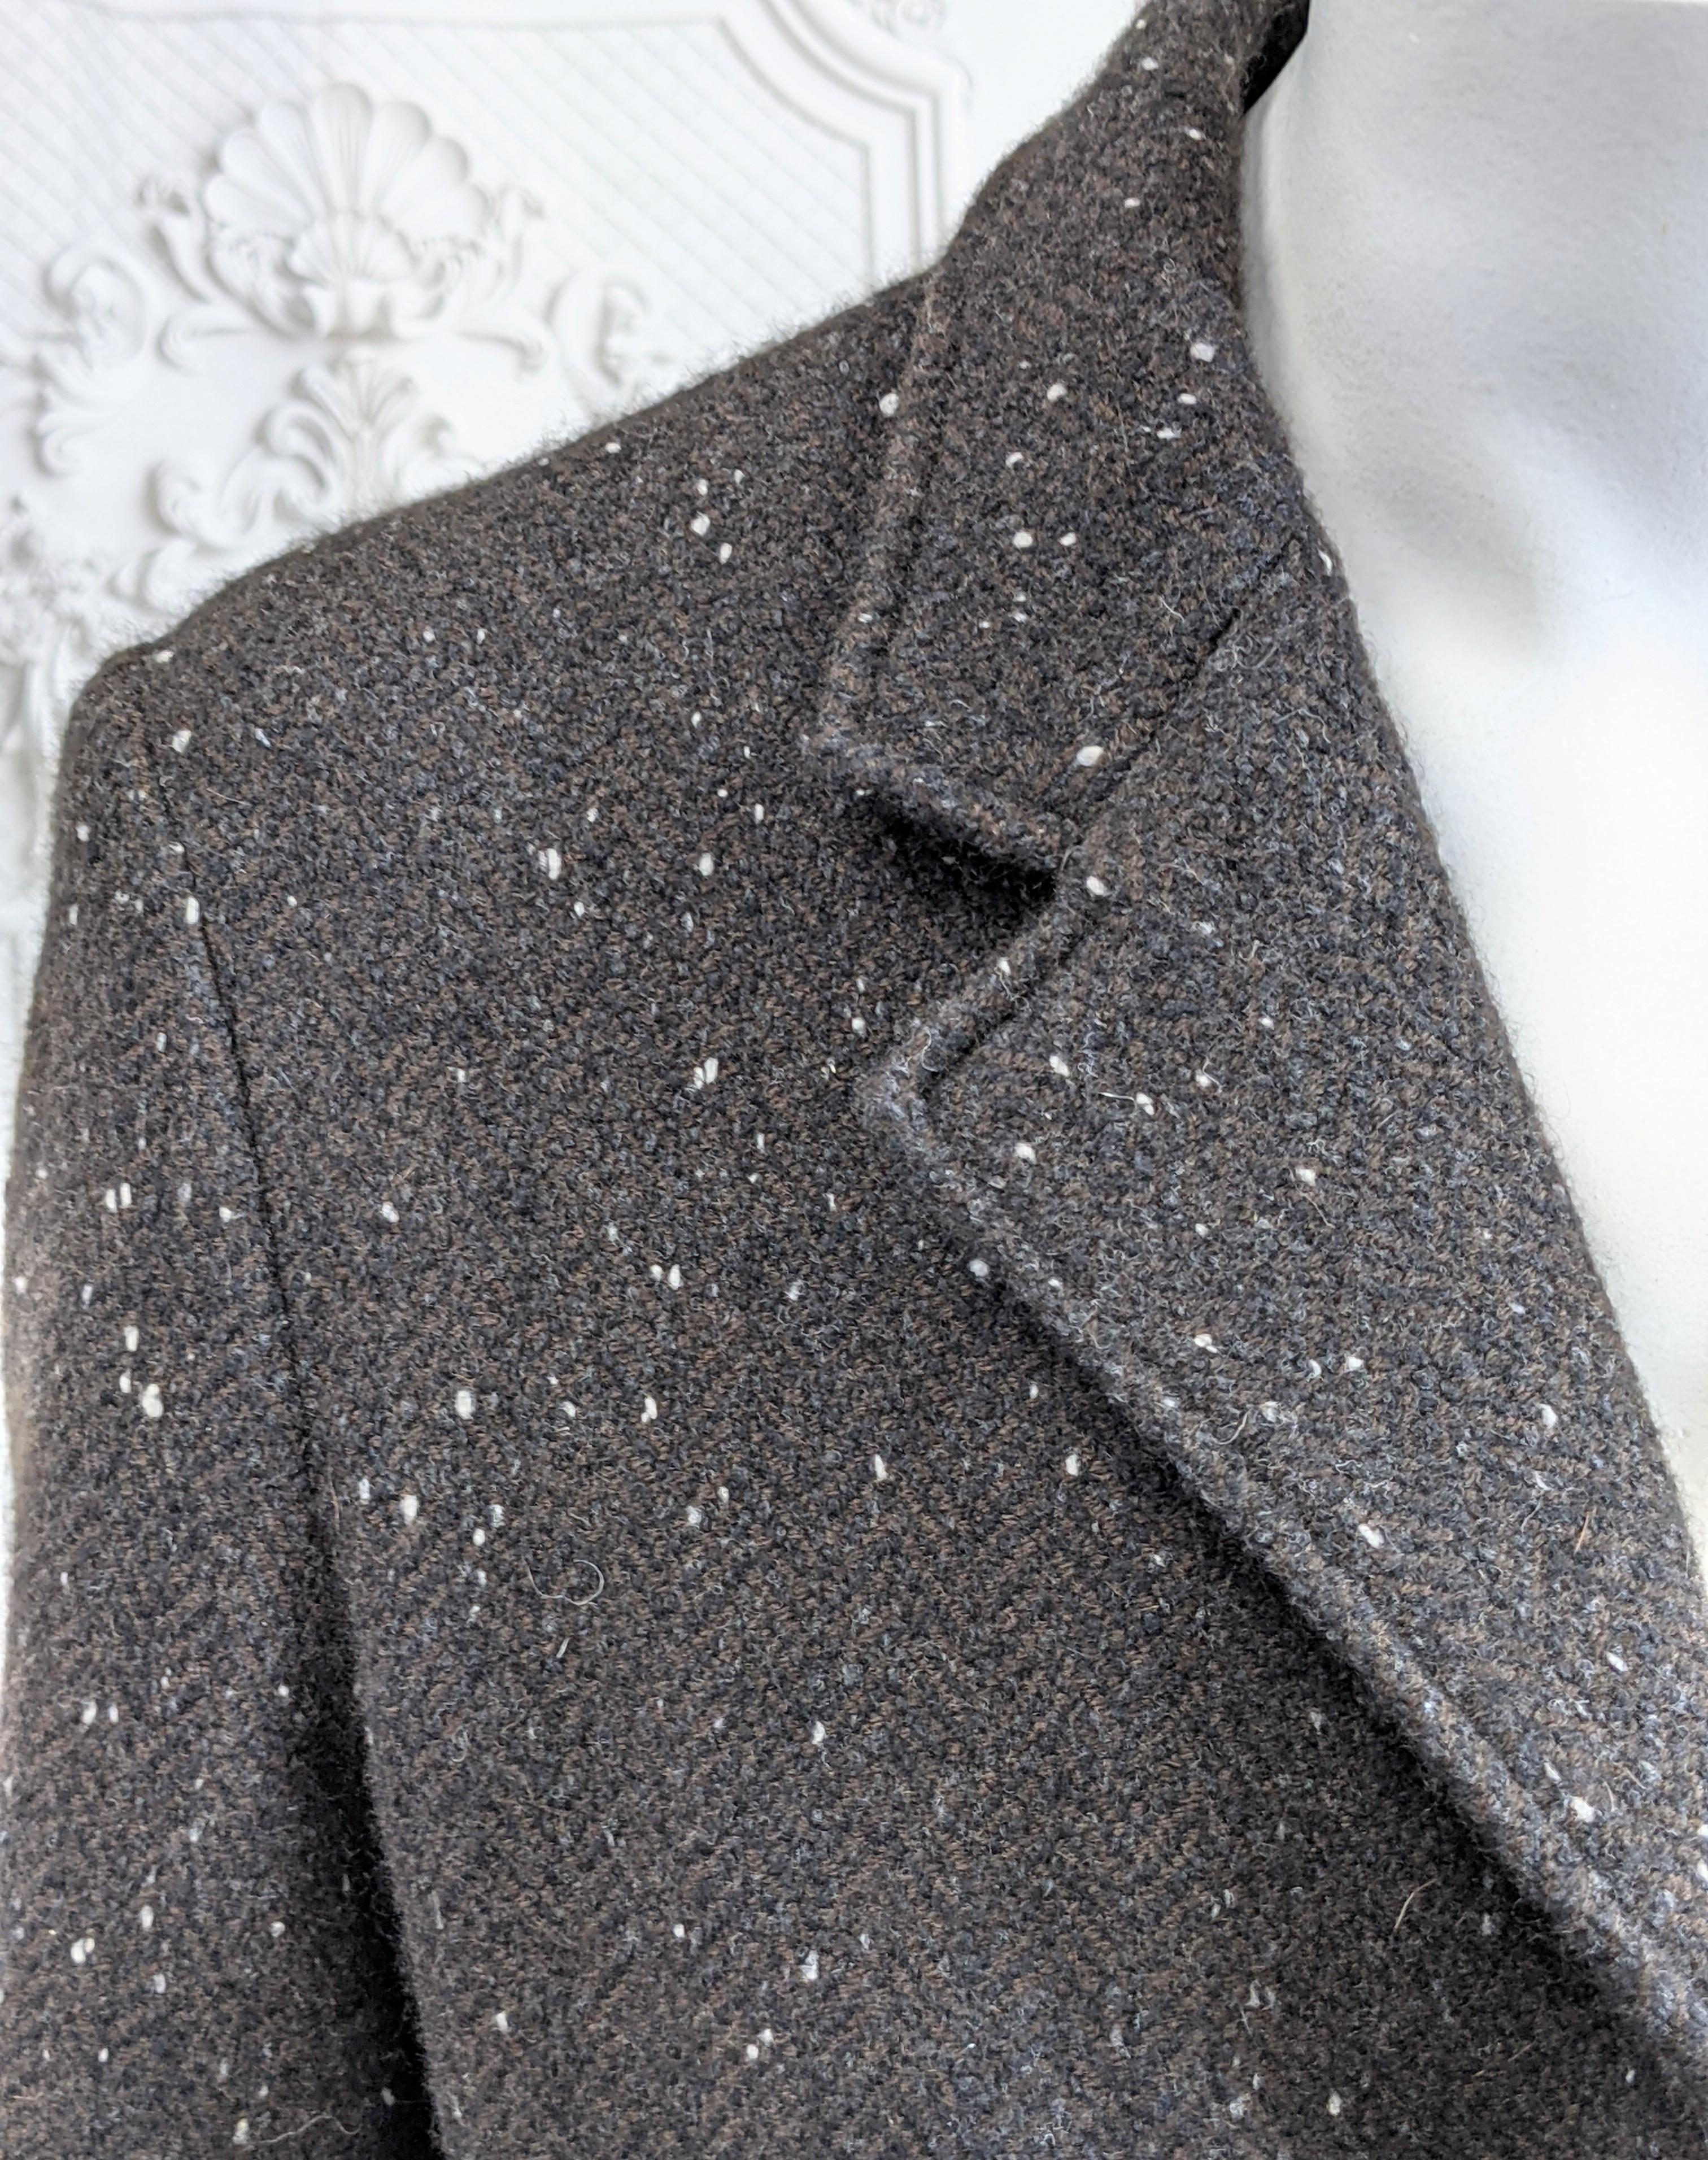 Jil Sander Cashmere Tweed Blazer In Excellent Condition For Sale In New York, NY